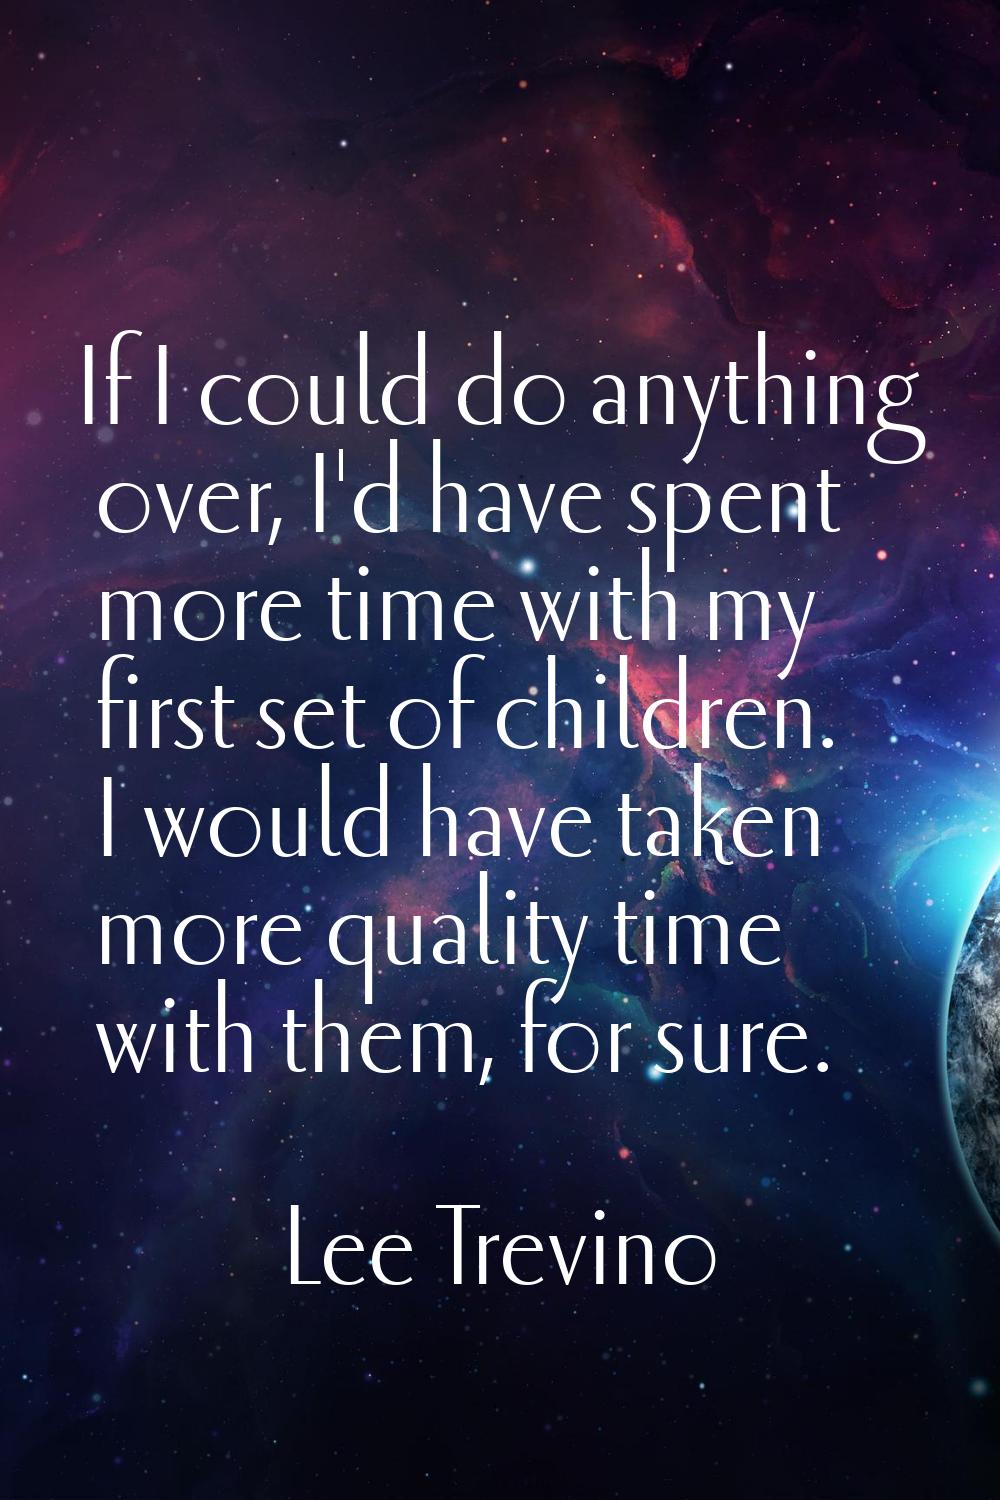 If I could do anything over, I'd have spent more time with my first set of children. I would have t